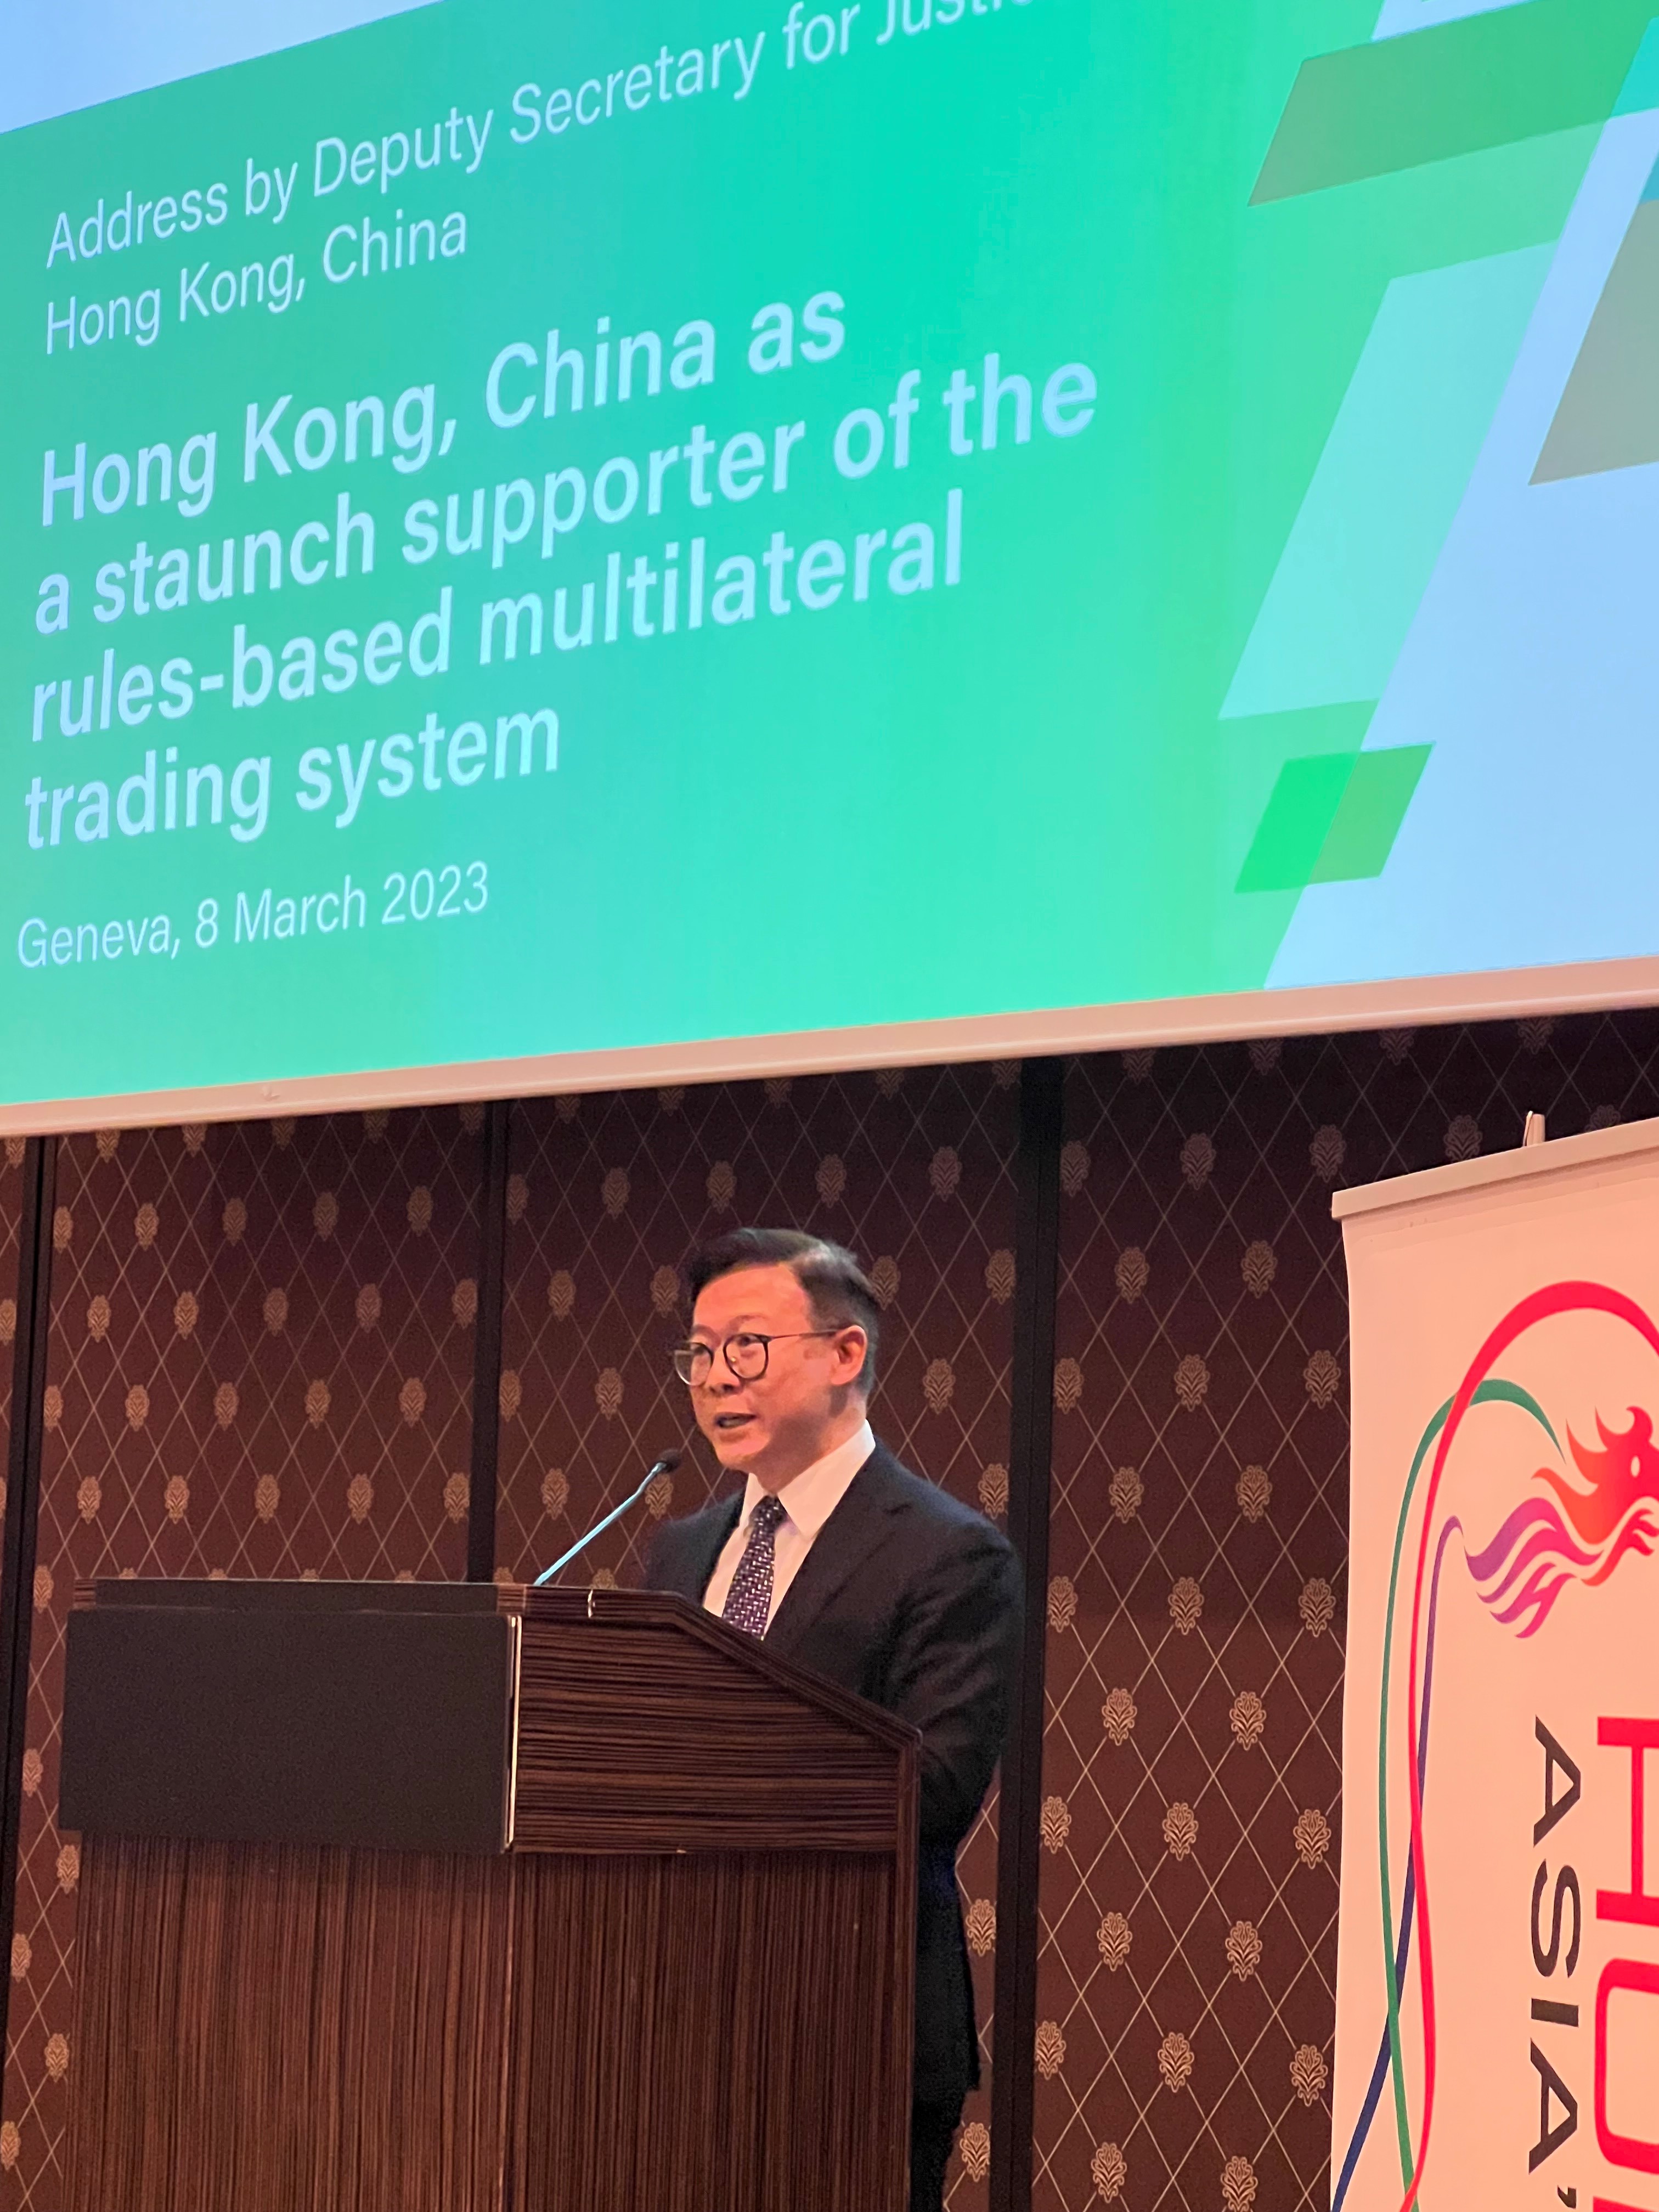 The Deputy Secretary for Justice, Mr Cheung Kwok-kwan, on March 8 (Geneva time) attended in Geneva, Switzerland, a reception hosted by the Hong Kong Economic and Trade Office in Geneva. Photo shows Mr Cheung speaking at the reception.